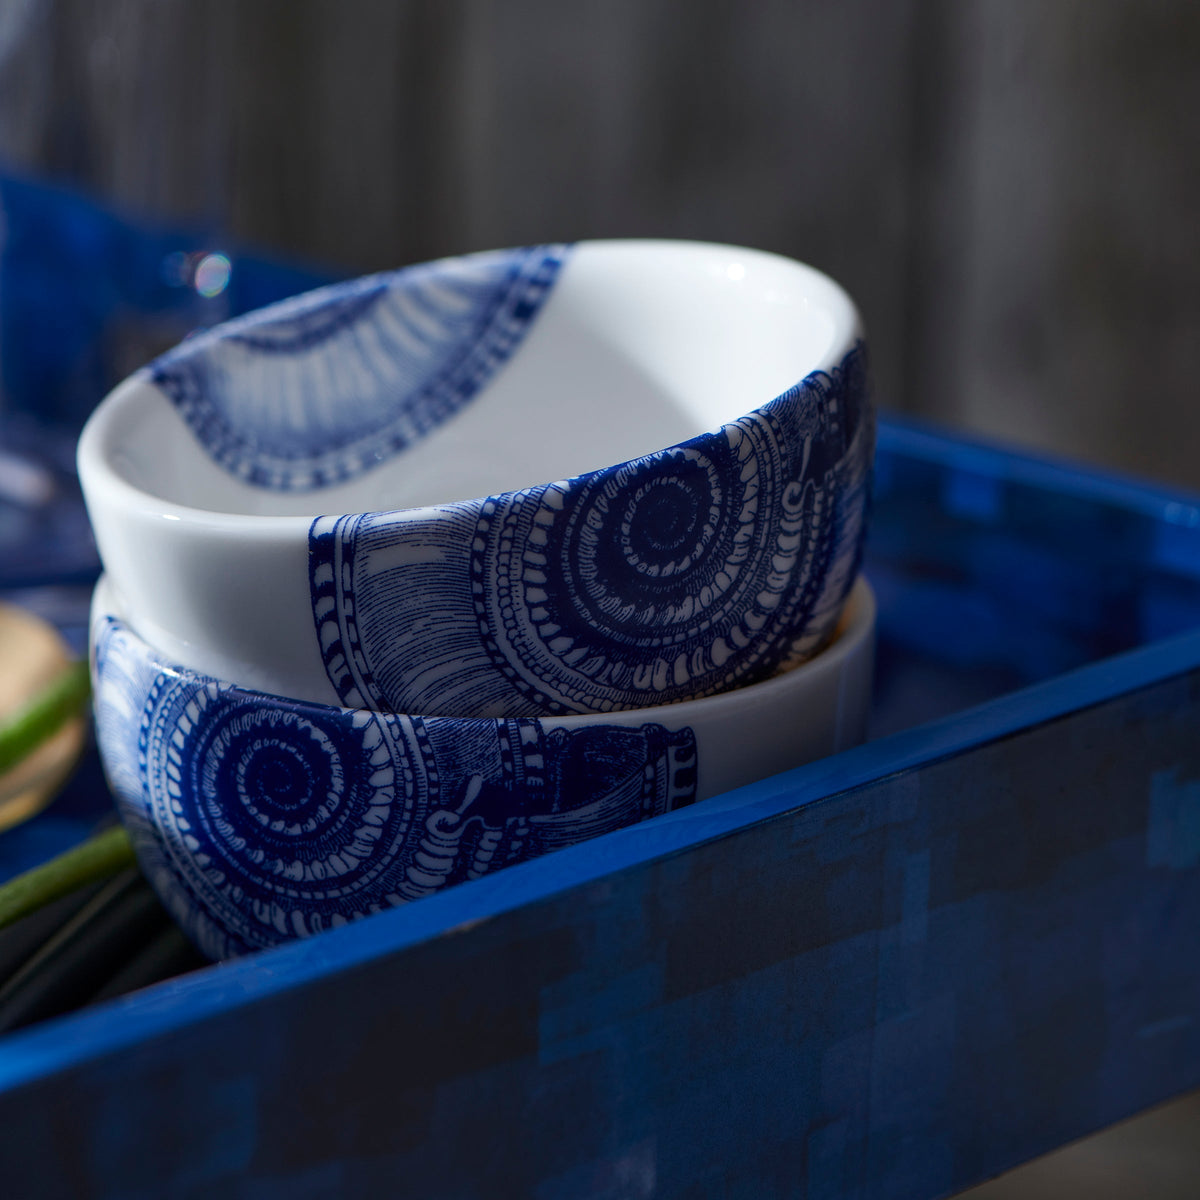 A small, blue and white Shells Snack Bowl resembling a nautilus shell treasure on a tray by Caskata Artisanal Home.